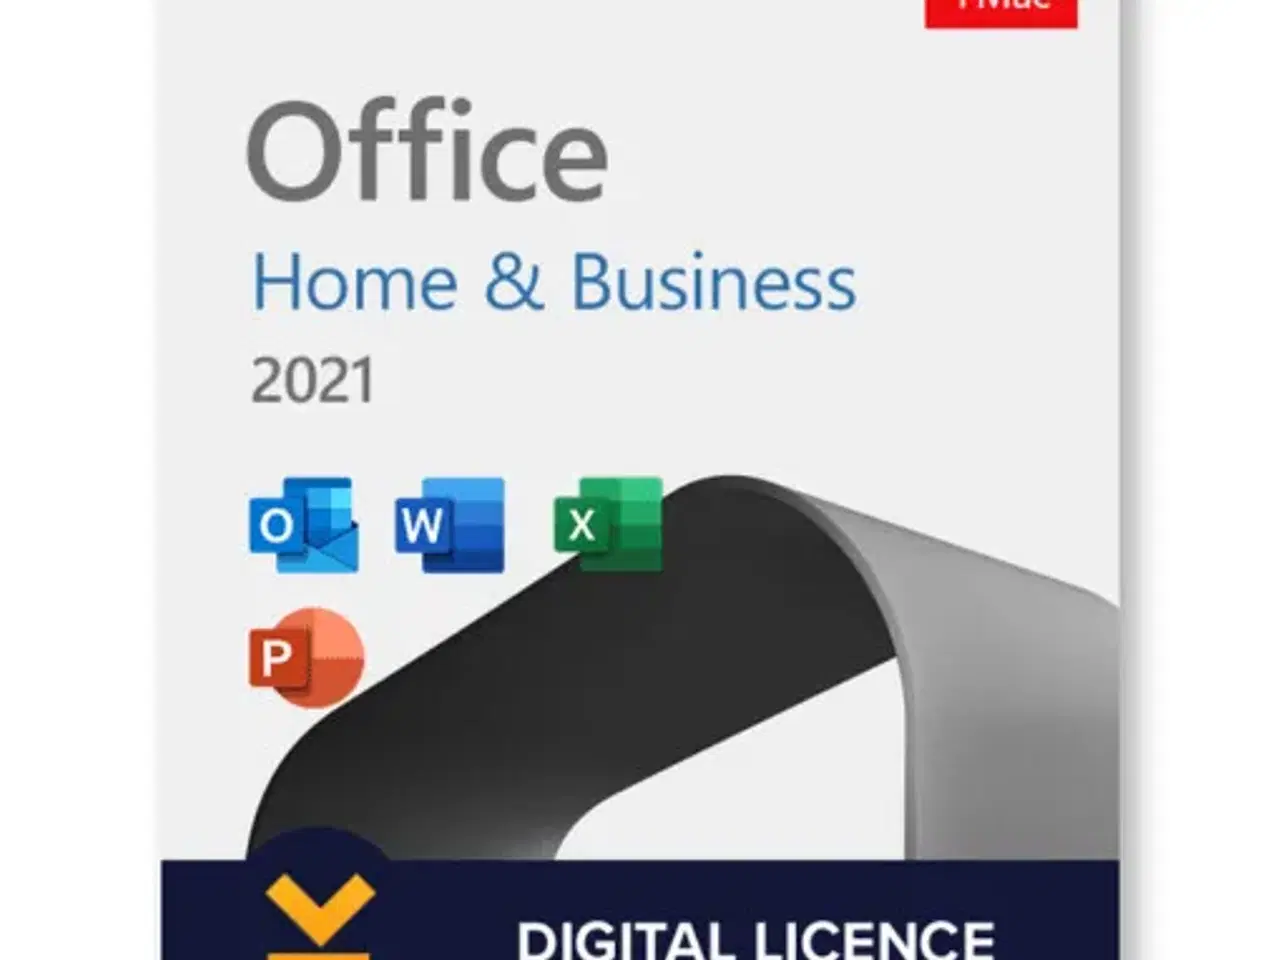 Billede 2 - Office Home and Business 2021 - Mac